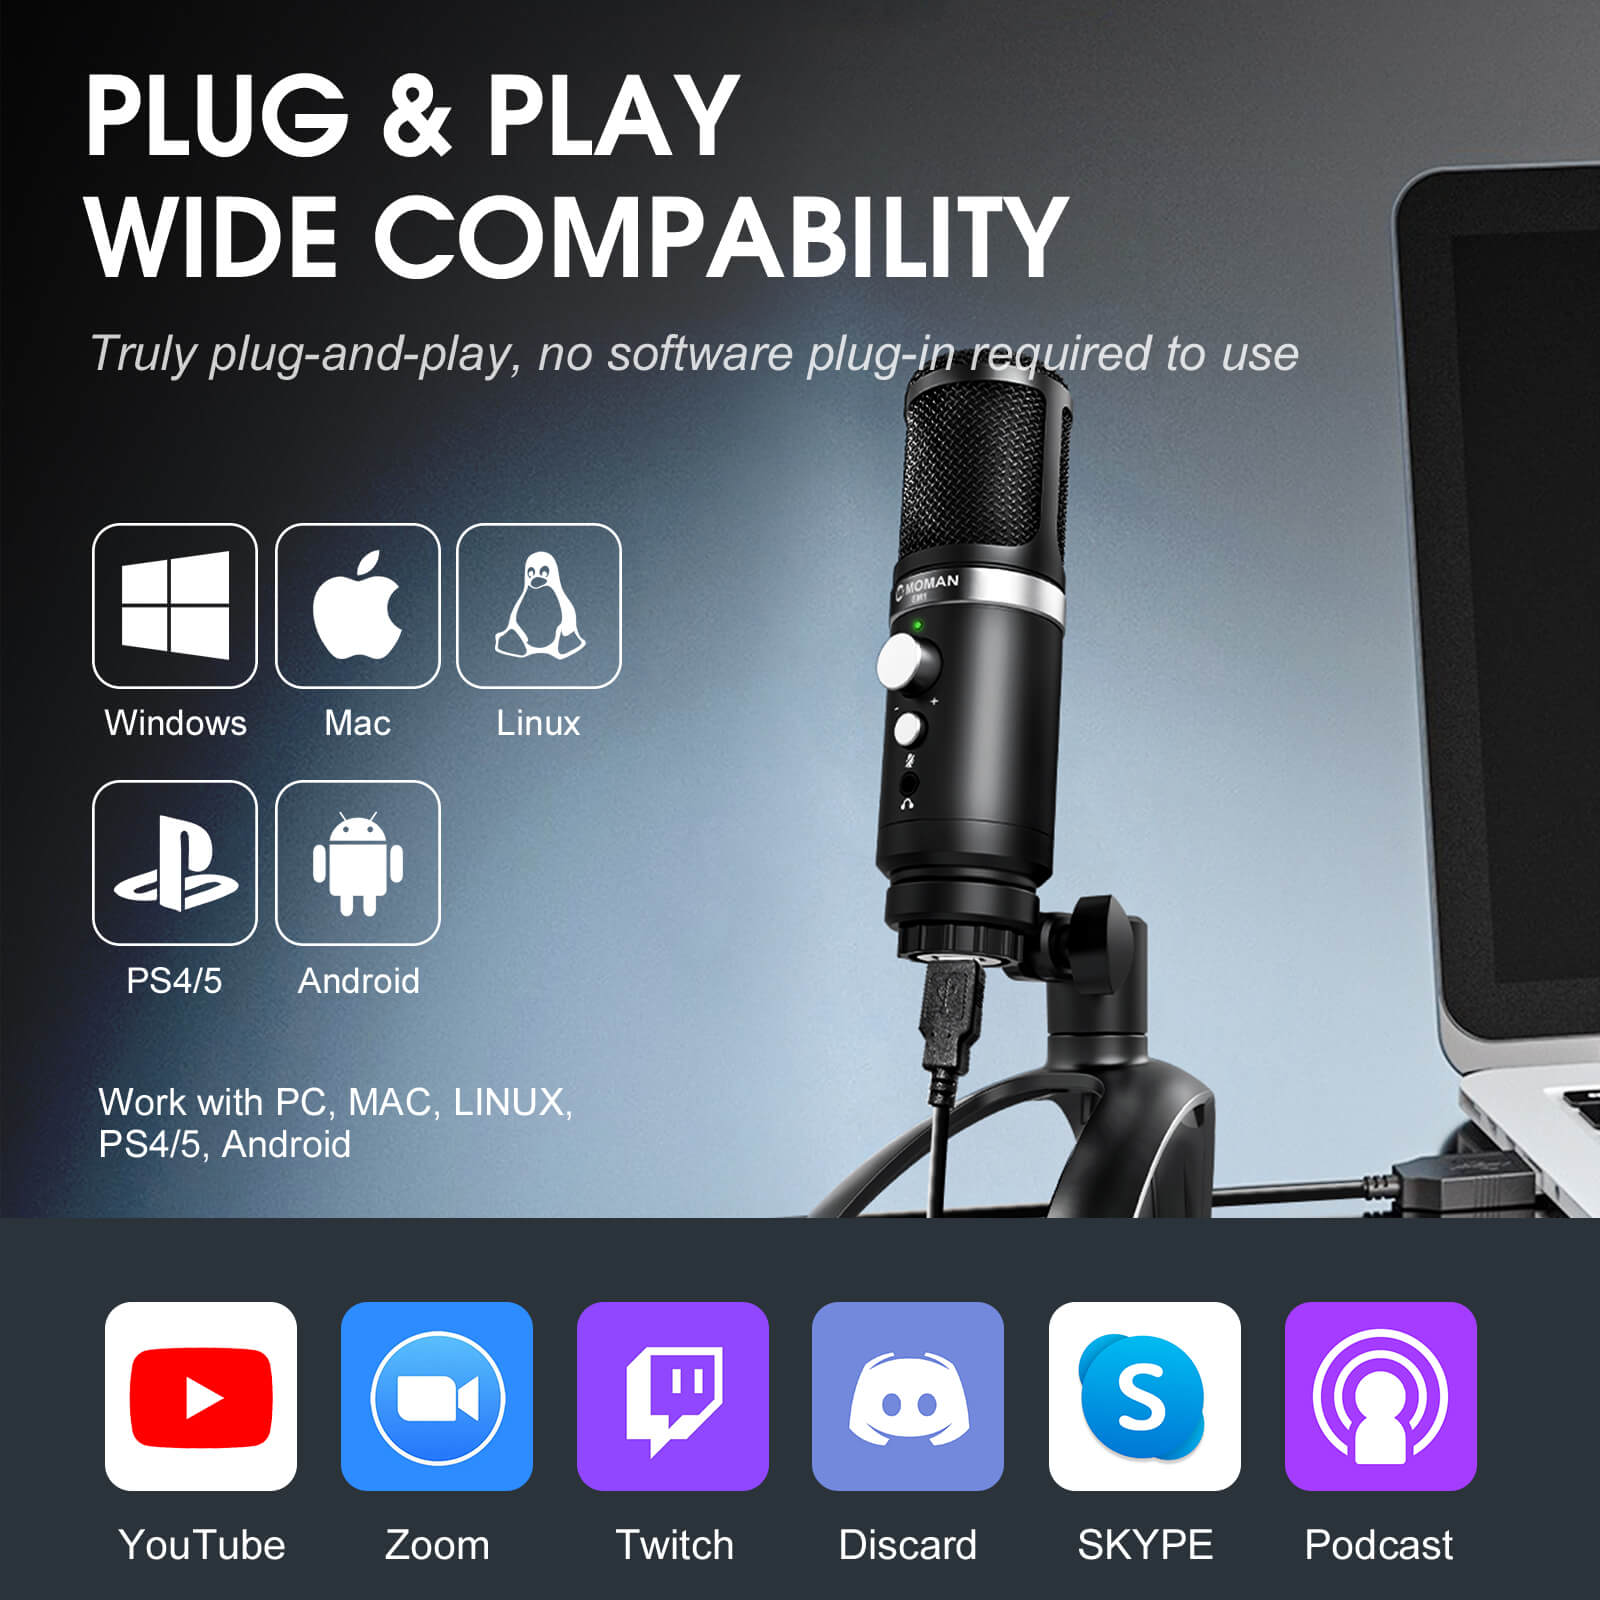 Moman EM1 is of wide compability, featuring plug & play design